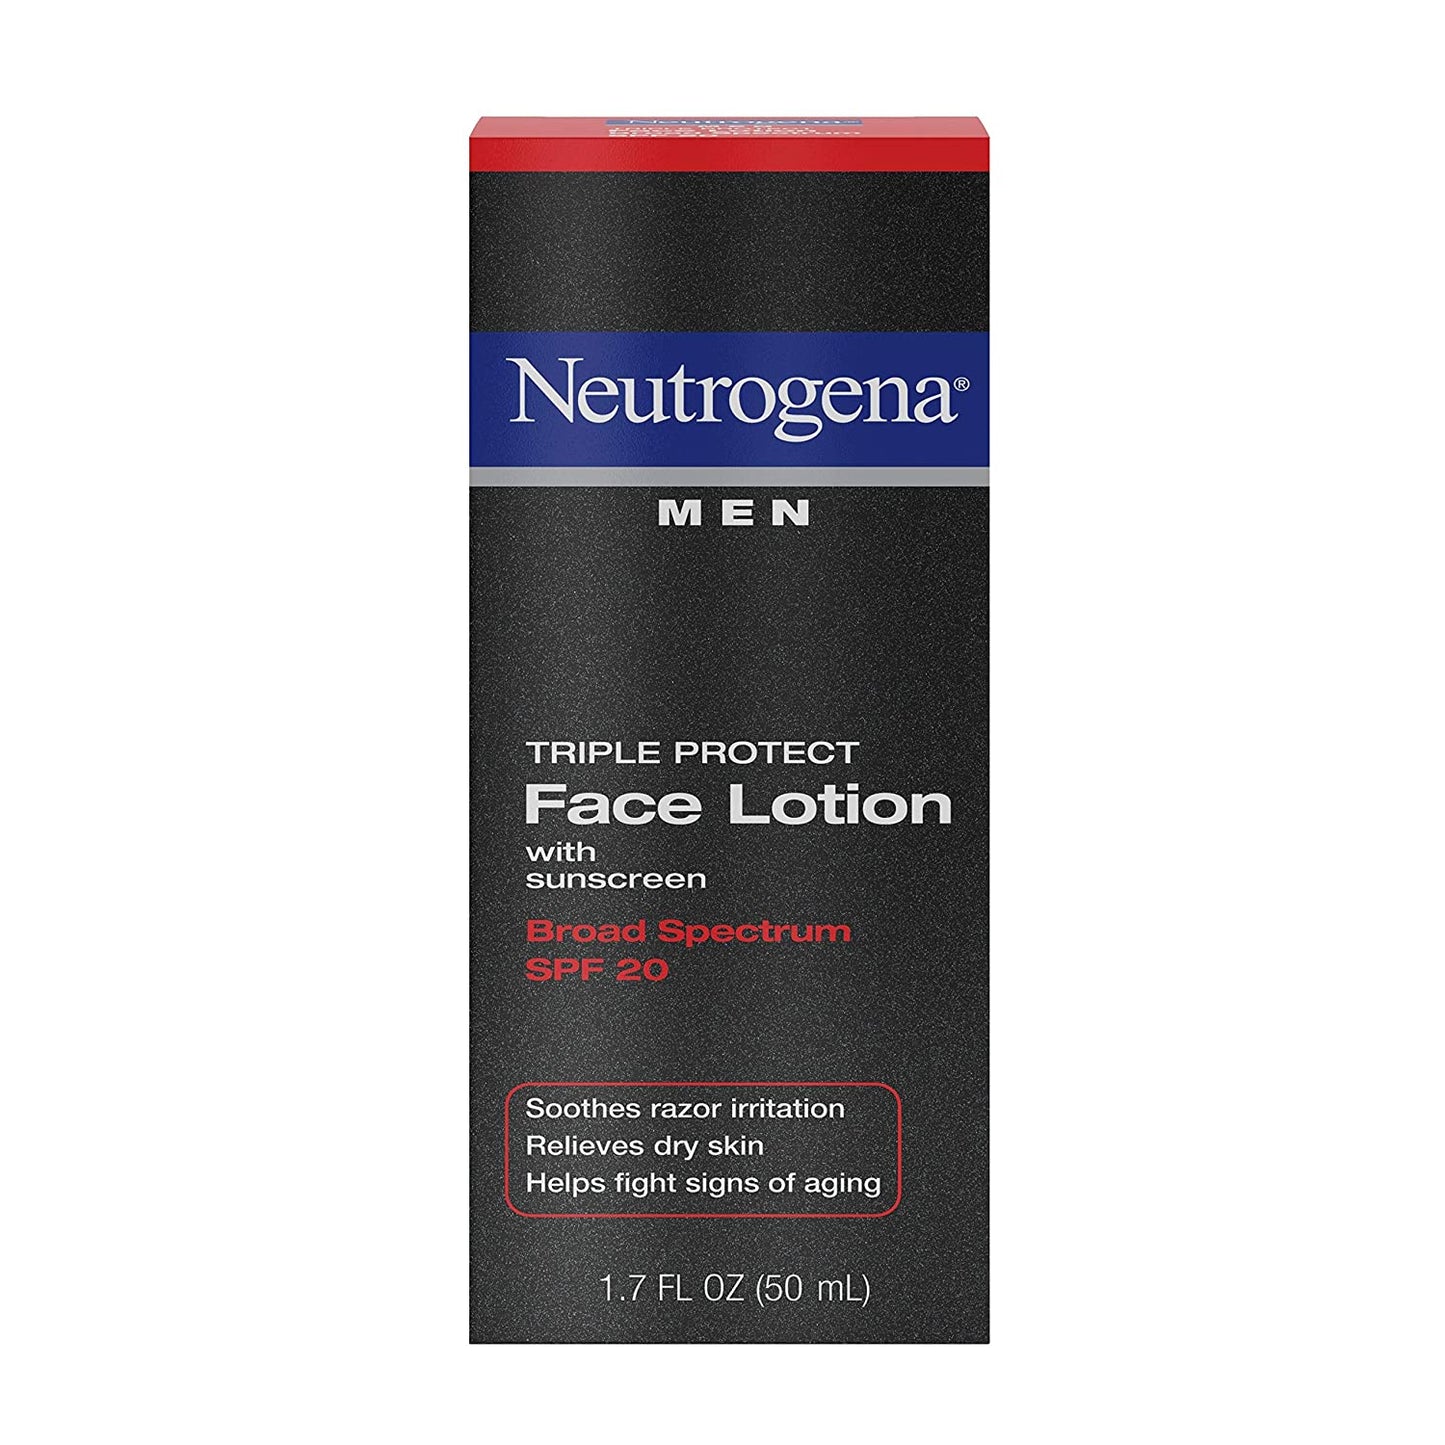 Neutrogena Men Triple Protect Face Lotion with Sunscreen Broad Spectrum SPF 20 50 mL, 1 Count